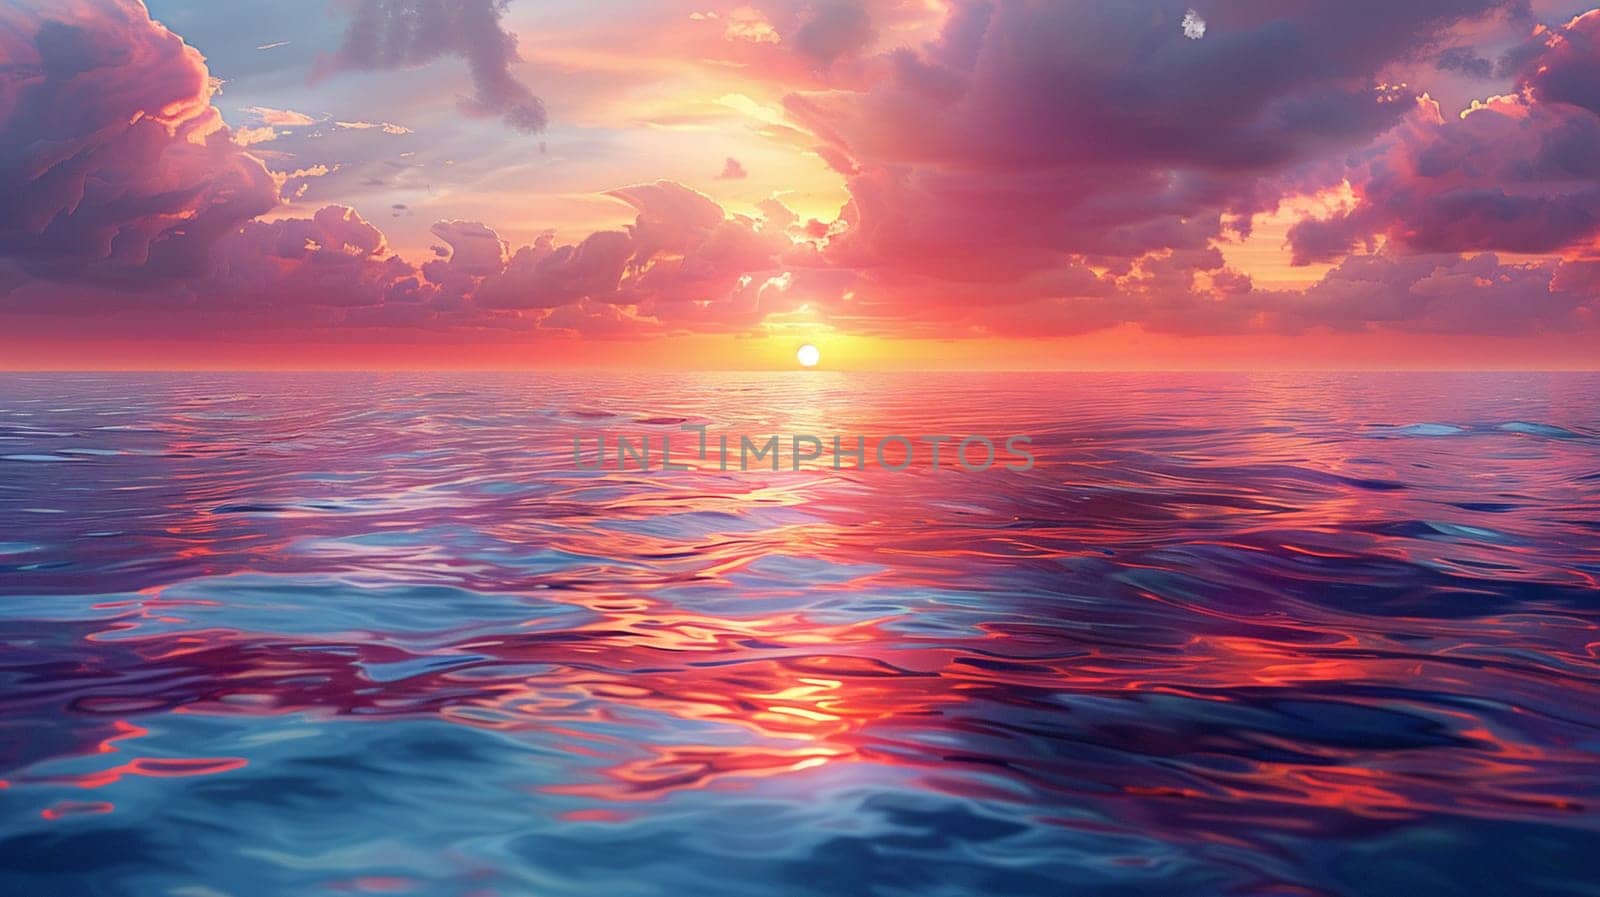 Sunset Reflections on a Calm Ocean Horizon, The sun's colors blur into the water, day's end painted on nature's canvas.